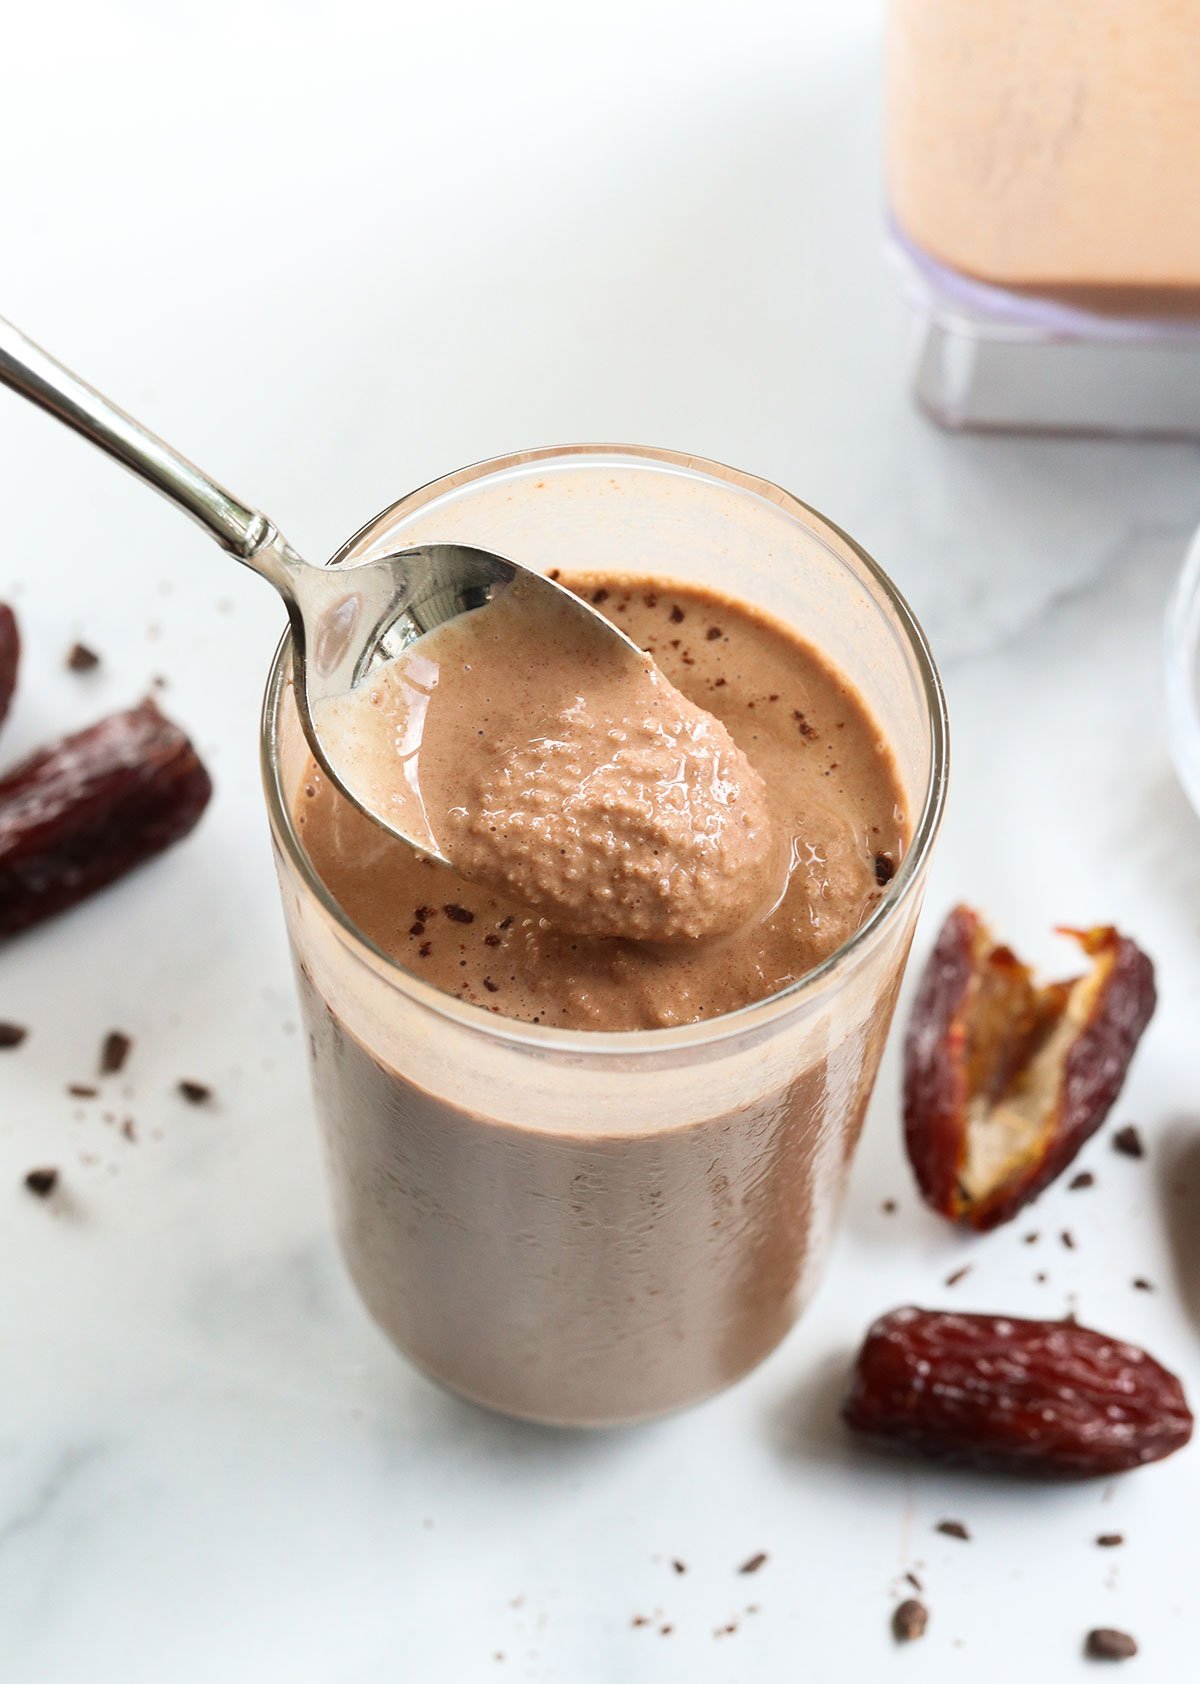 chocolate date smoothie lifted up on a spoon from the glass.